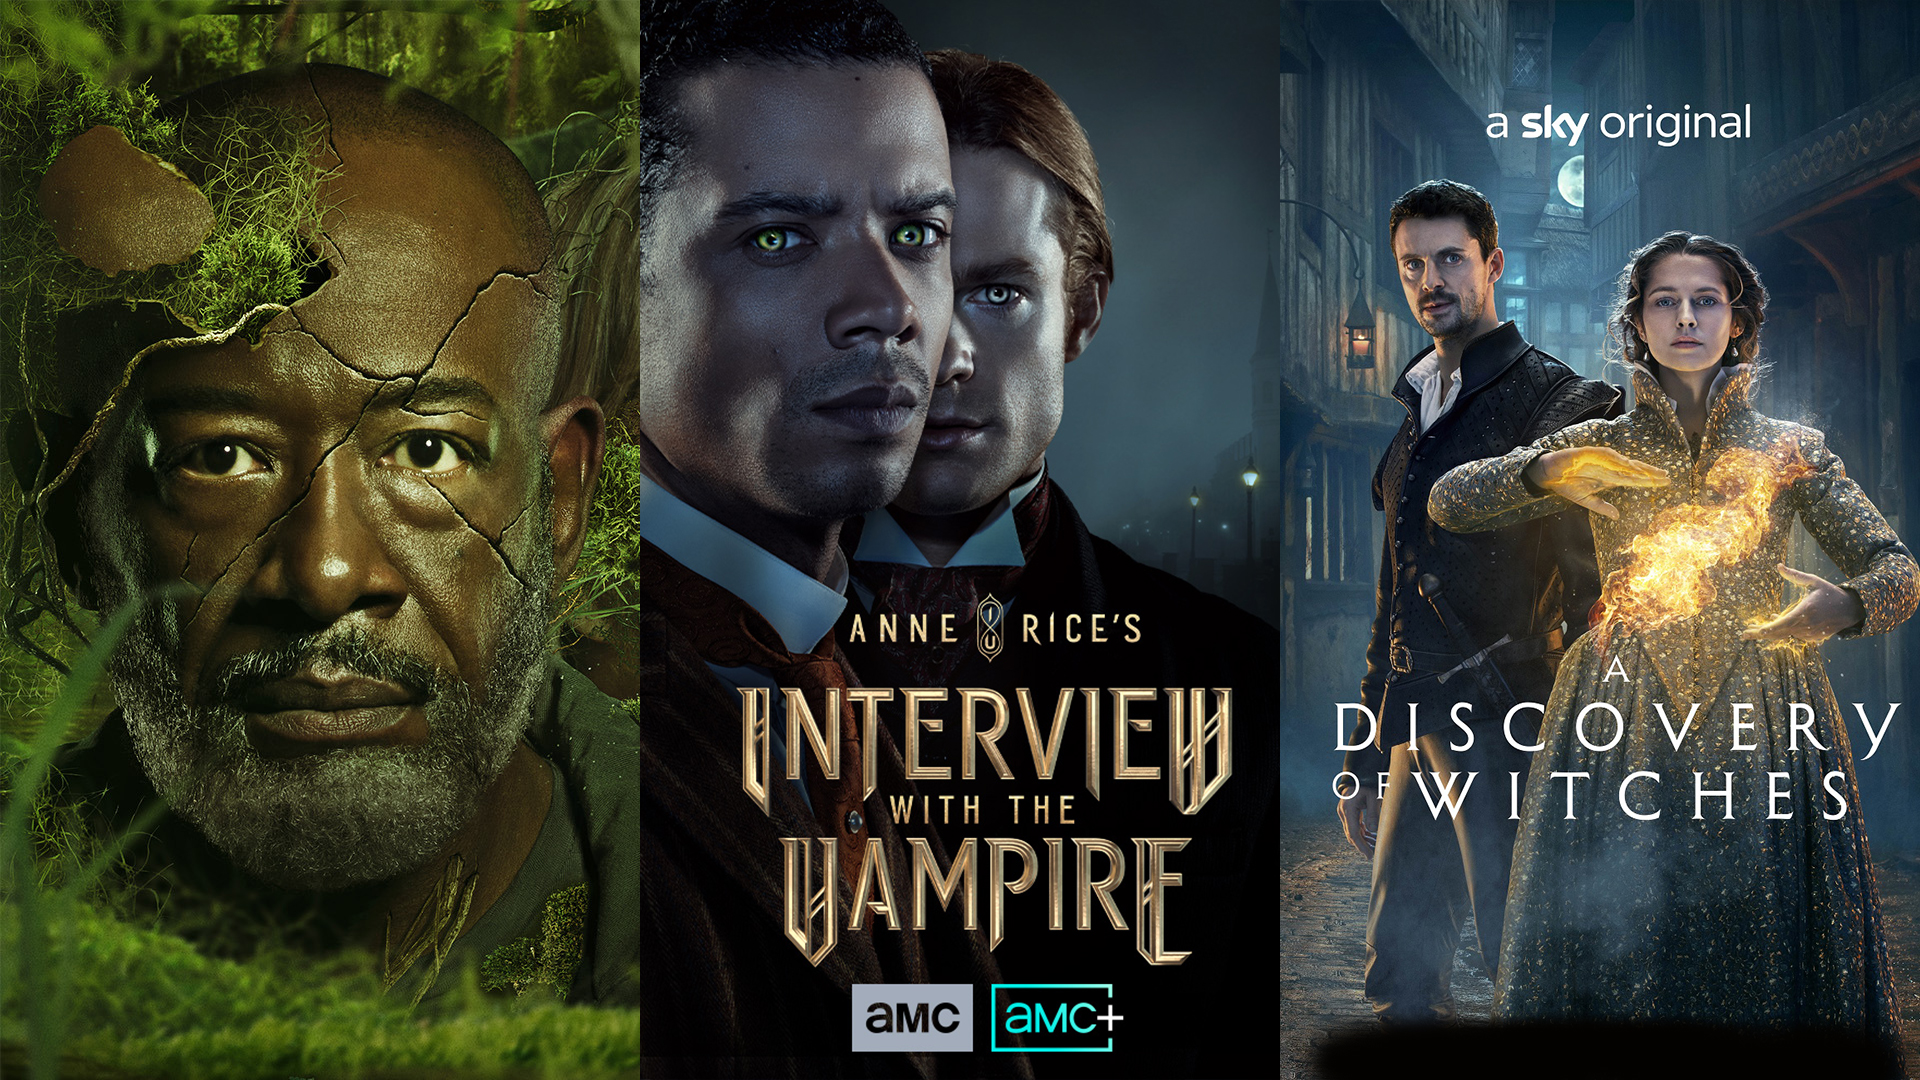 AMC shows are now streaming on Max here are 3 scary good series to